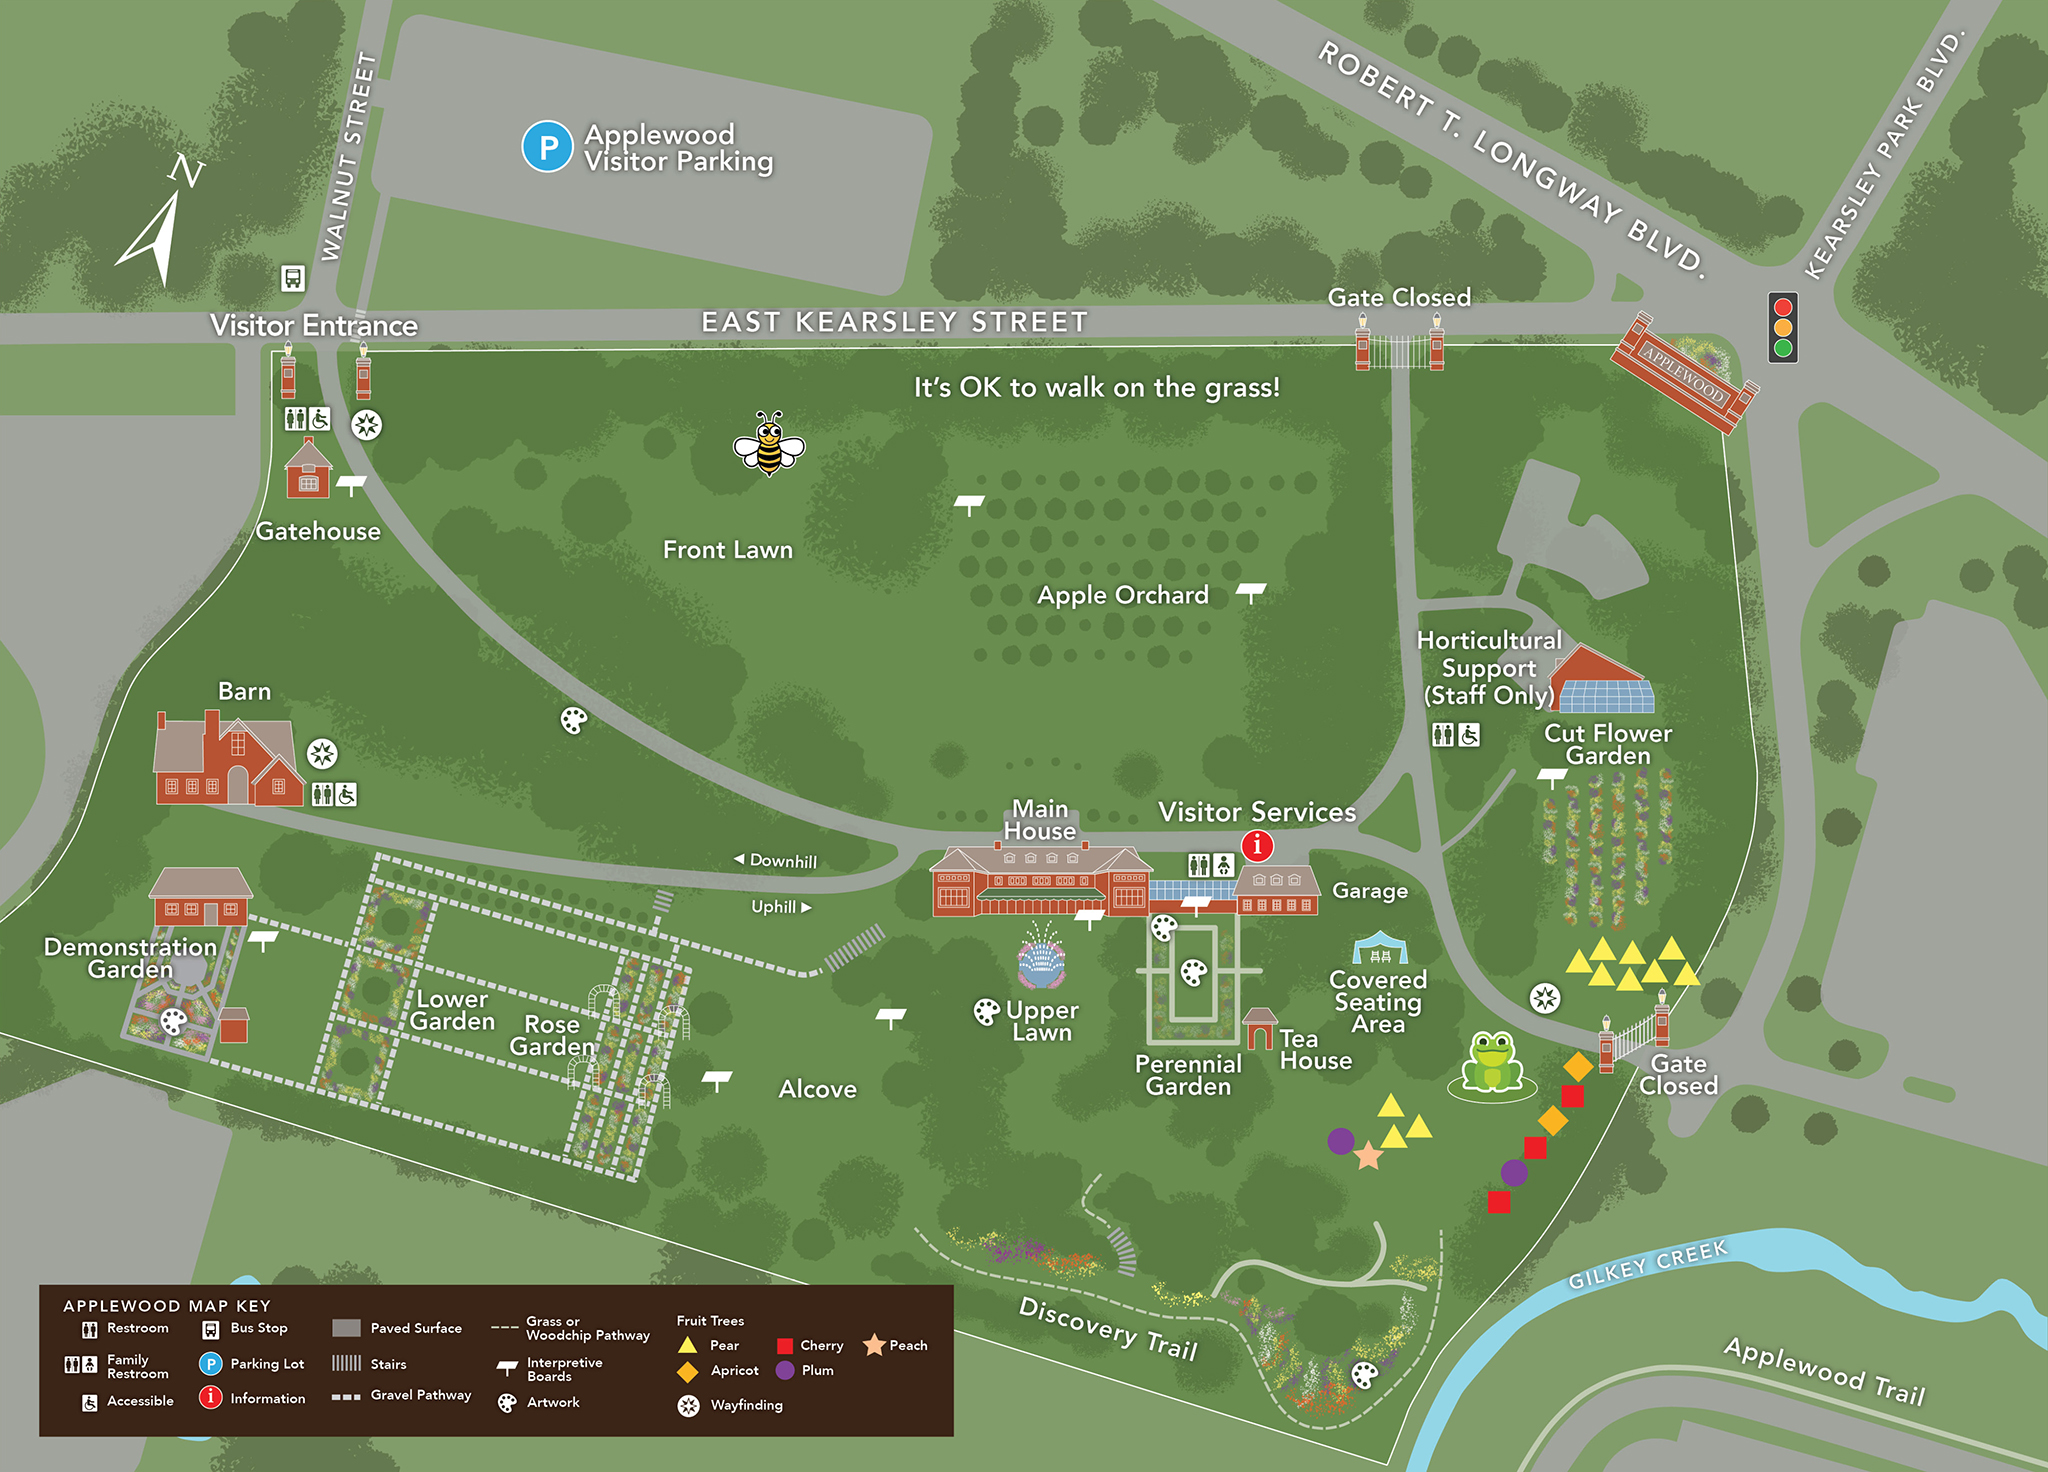 A graphic map of Applewood showing the location of the house in relation to the paths and visitor parking lot and entrance gate.